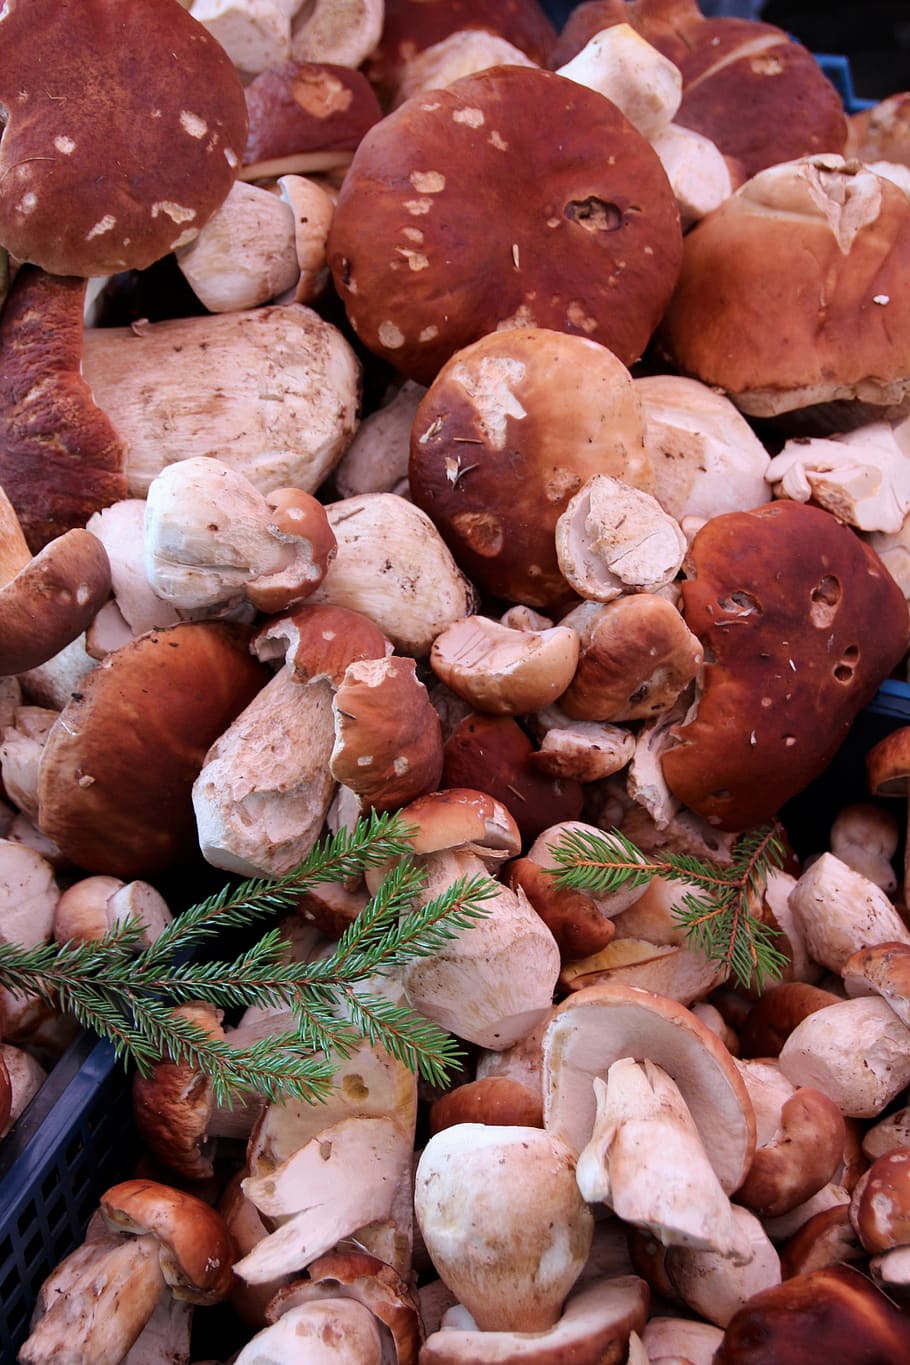 cep, forest, autumn, mushrooms, nature, market, chestnut, mushroom, noble rot, food and drink